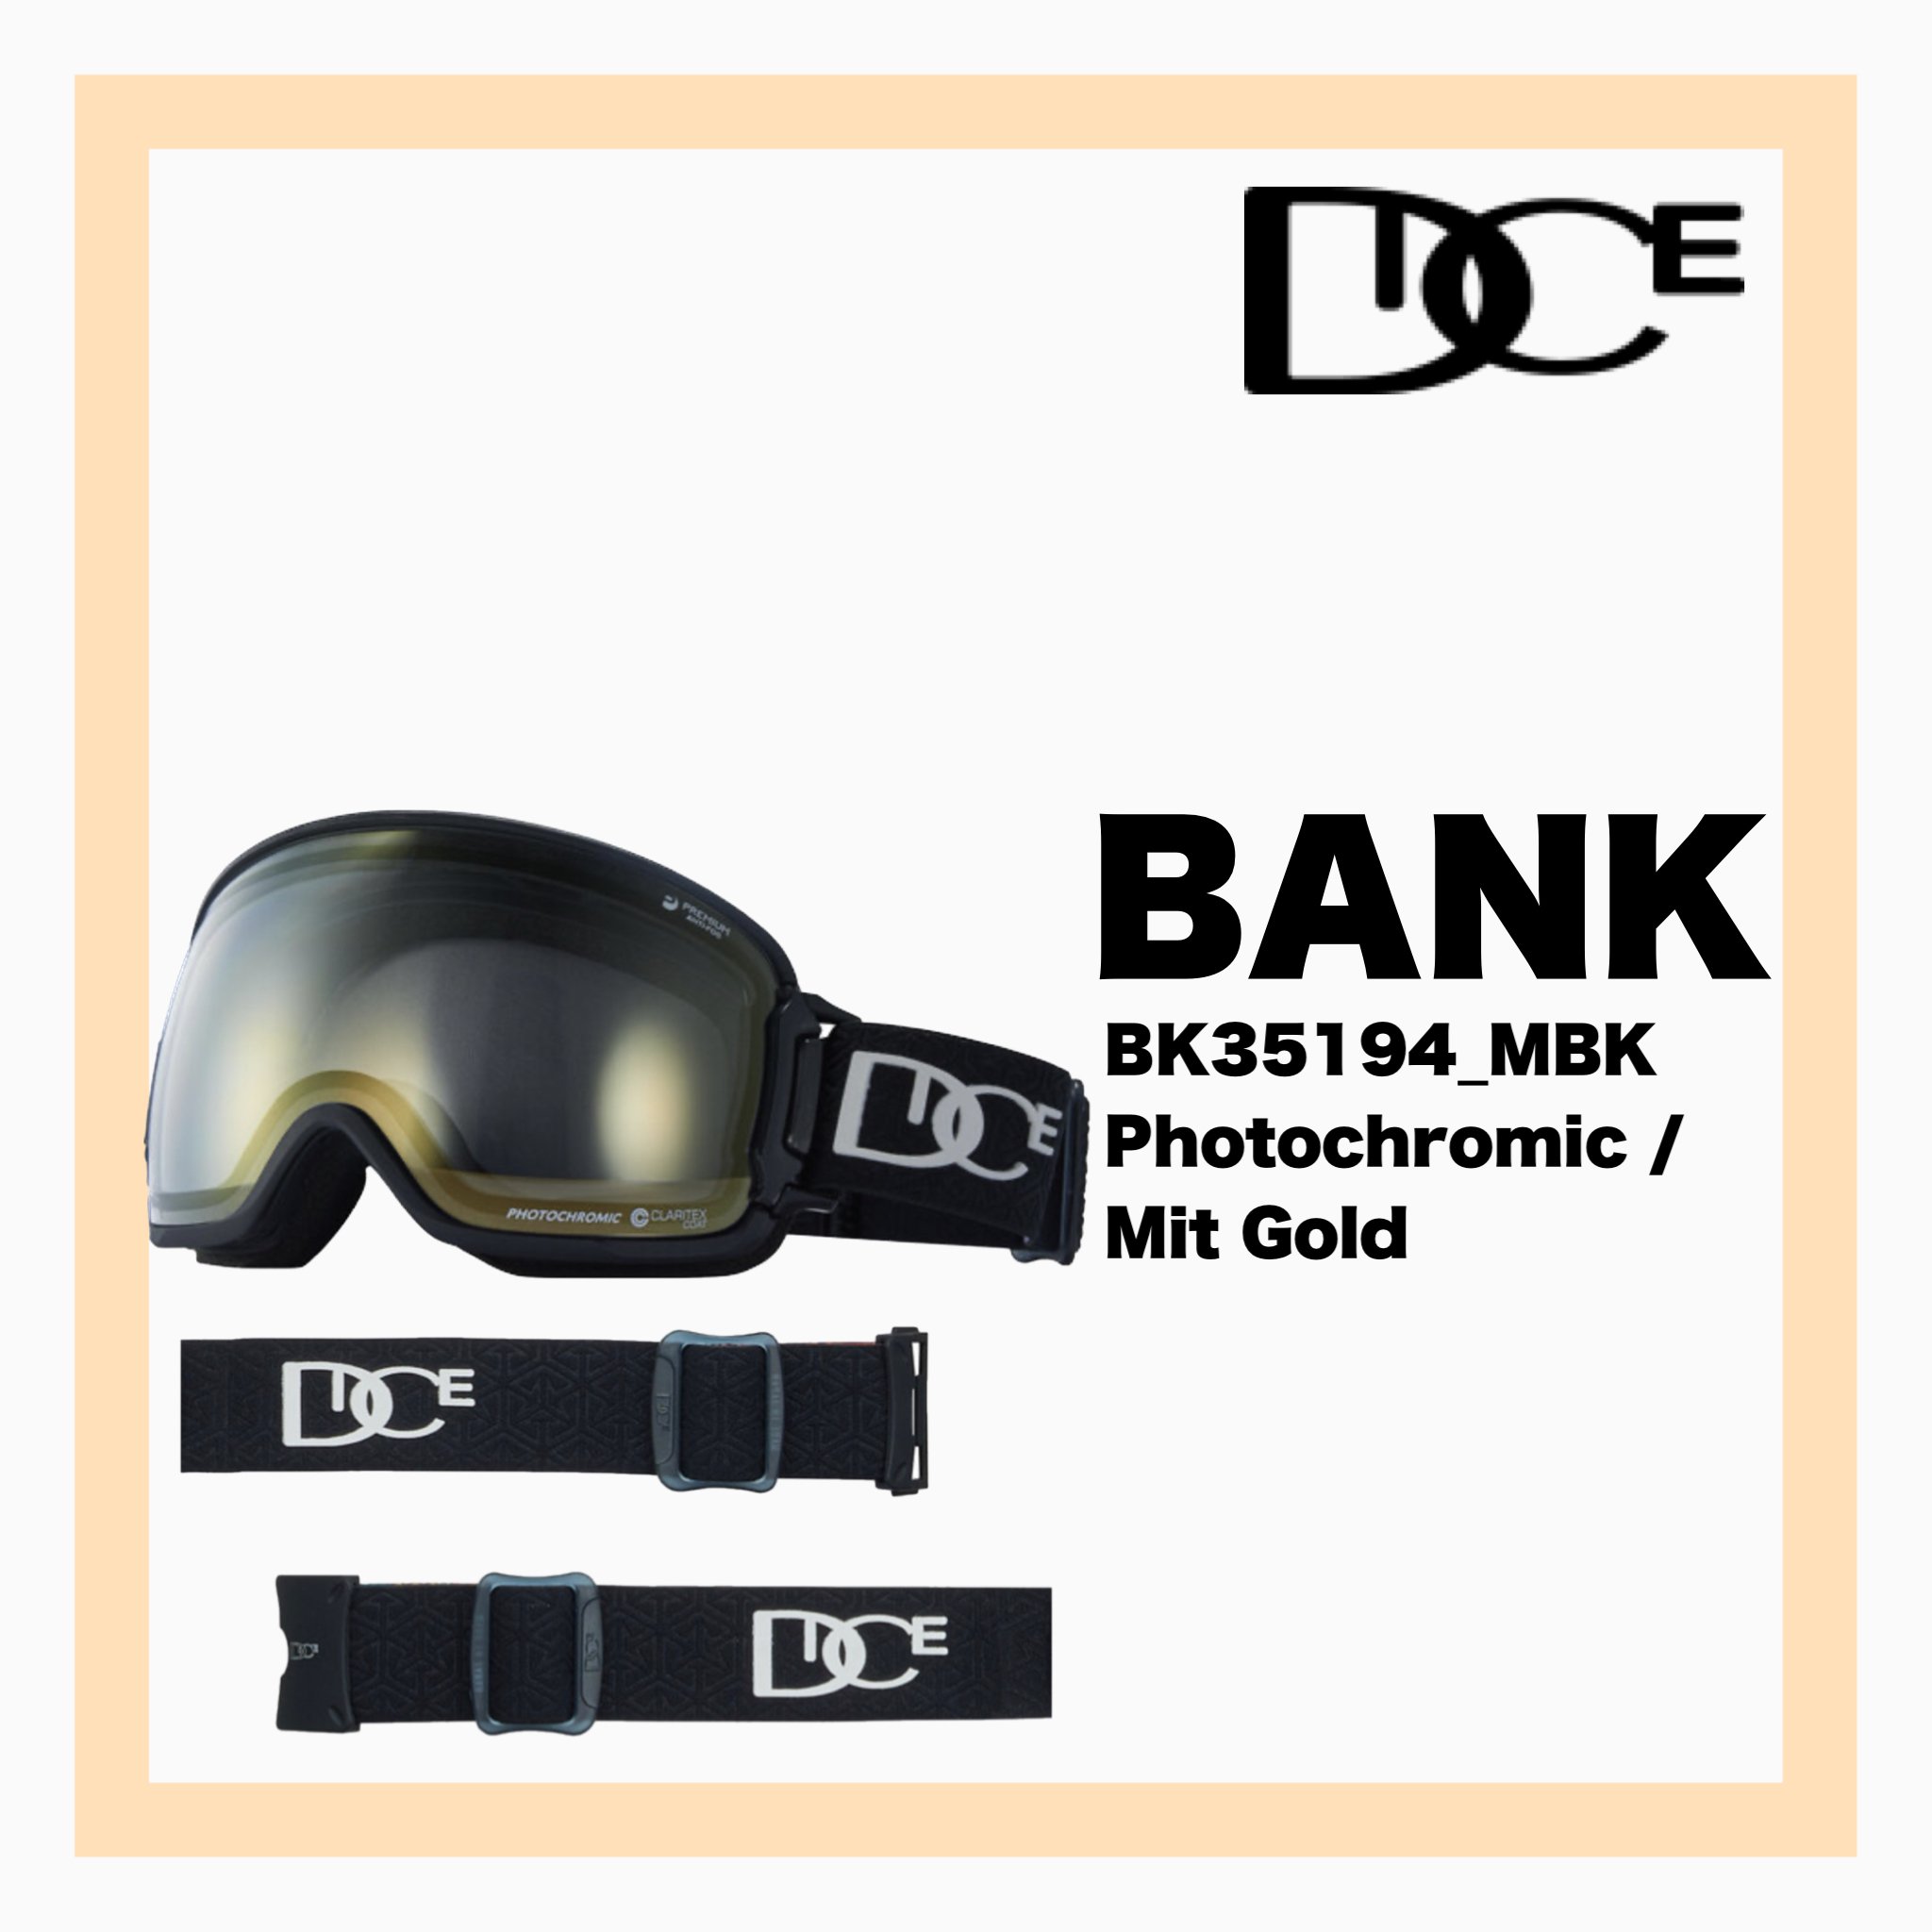 <img class='new_mark_img1' src='https://img.shop-pro.jp/img/new/icons34.gif' style='border:none;display:inline;margin:0px;padding:0px;width:auto;' />DICE BANK MBK  Photochromic / Mit Gold